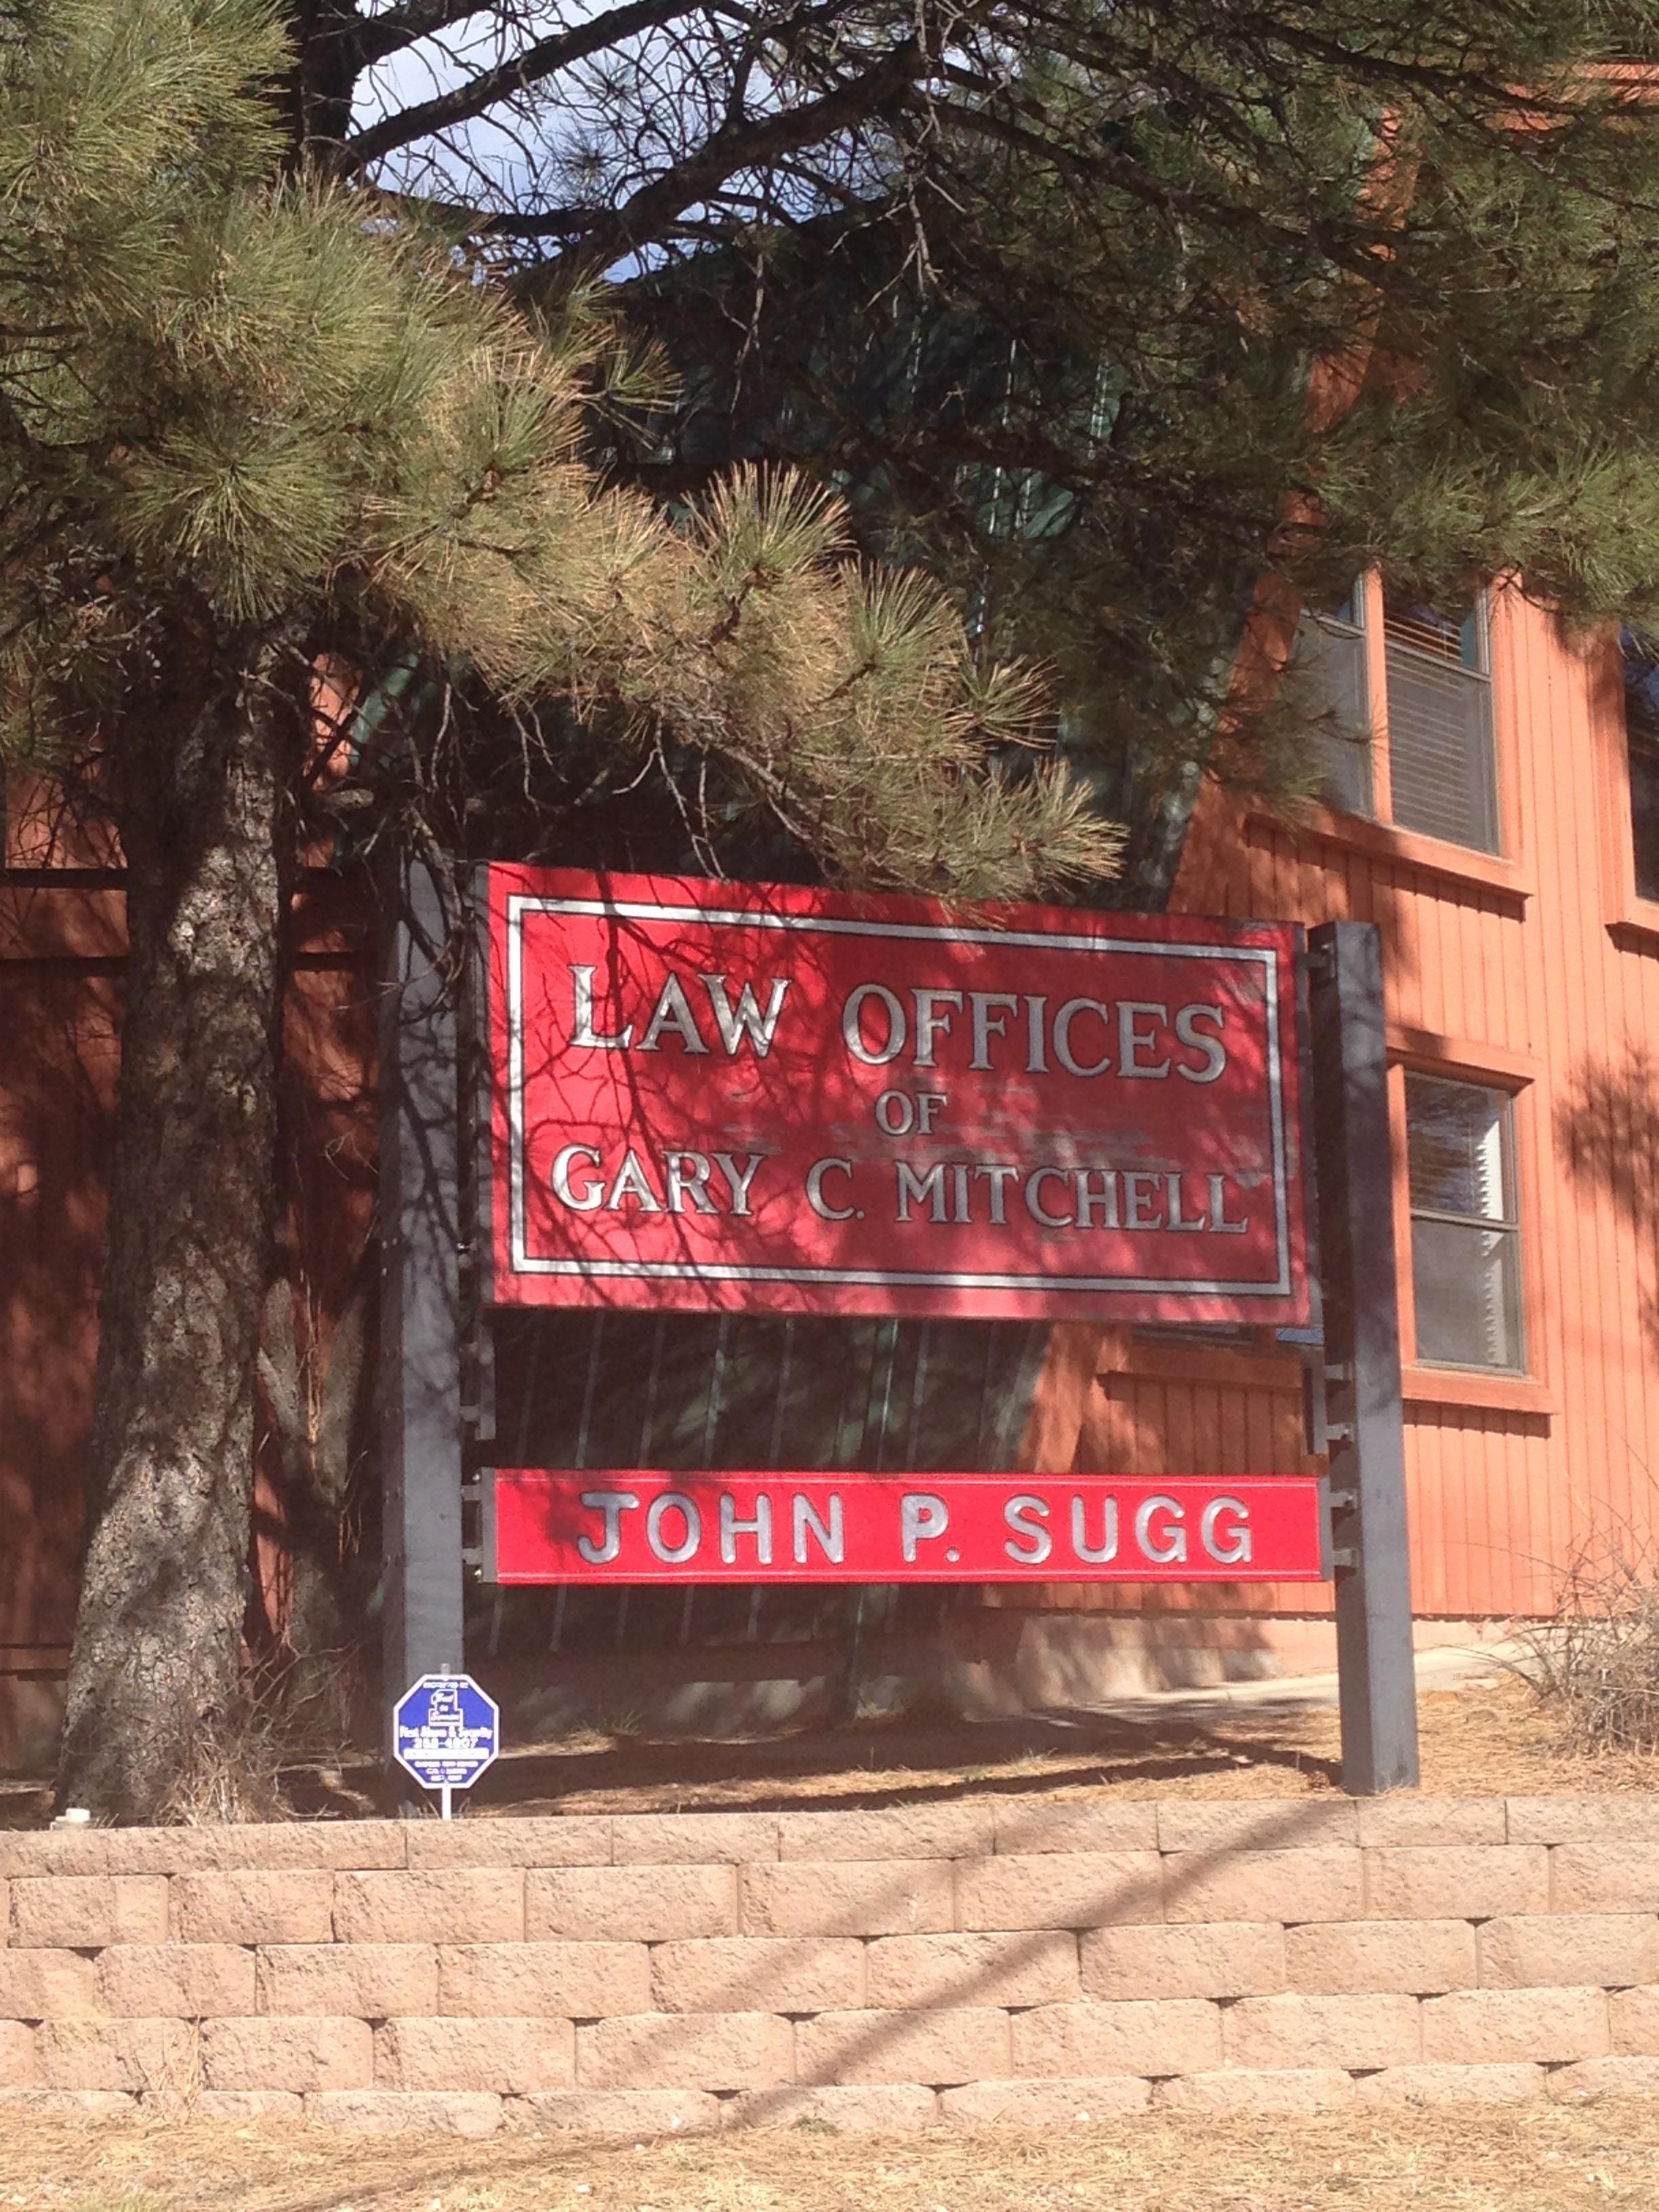 Our Office is located at 443 Mechem Dr., Ruidoso, NM, right next door to Casa Blanca Restaurant.